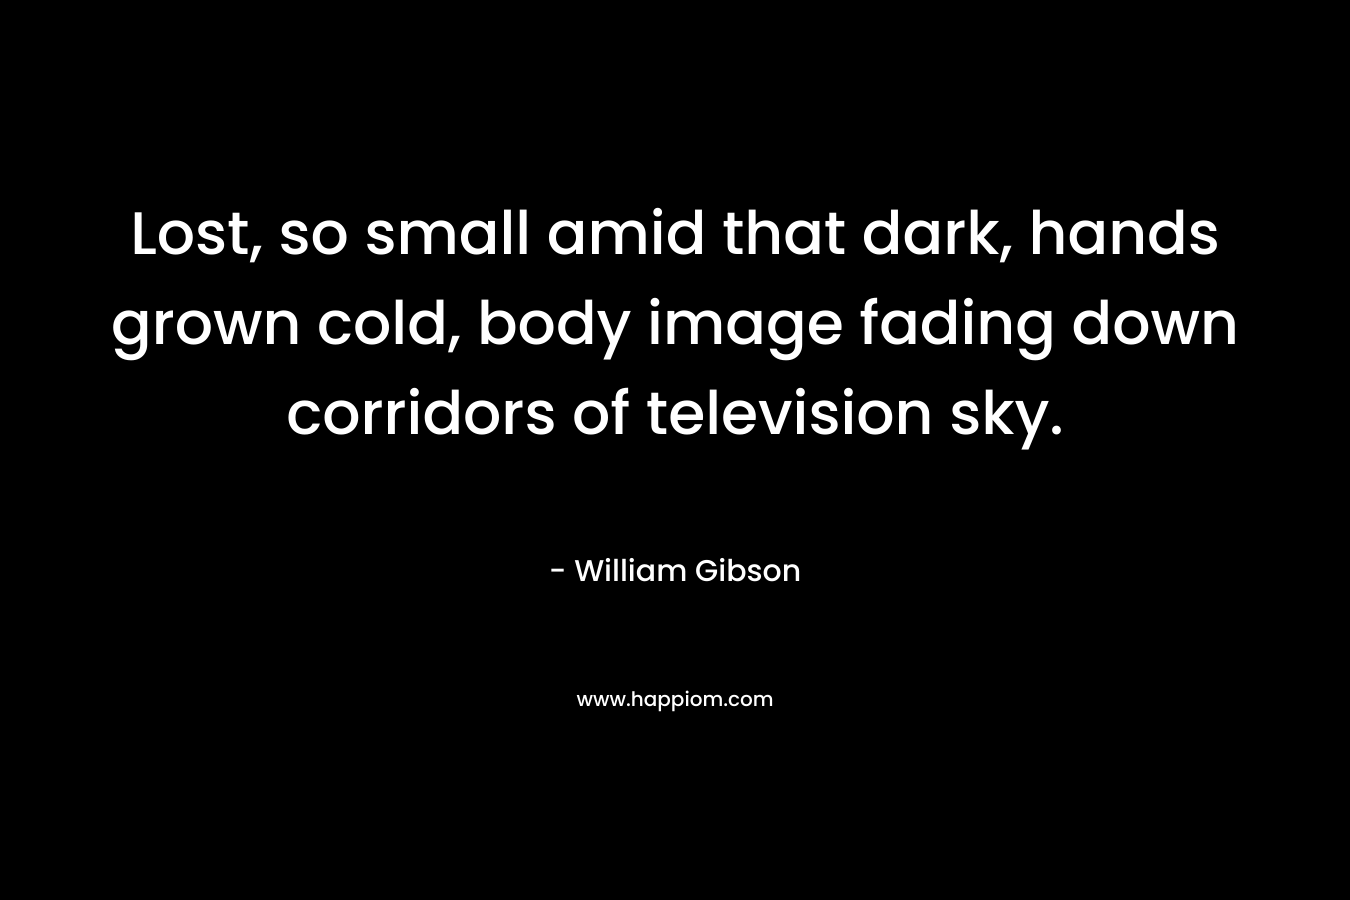 Lost, so small amid that dark, hands grown cold, body image fading down corridors of television sky. – William Gibson